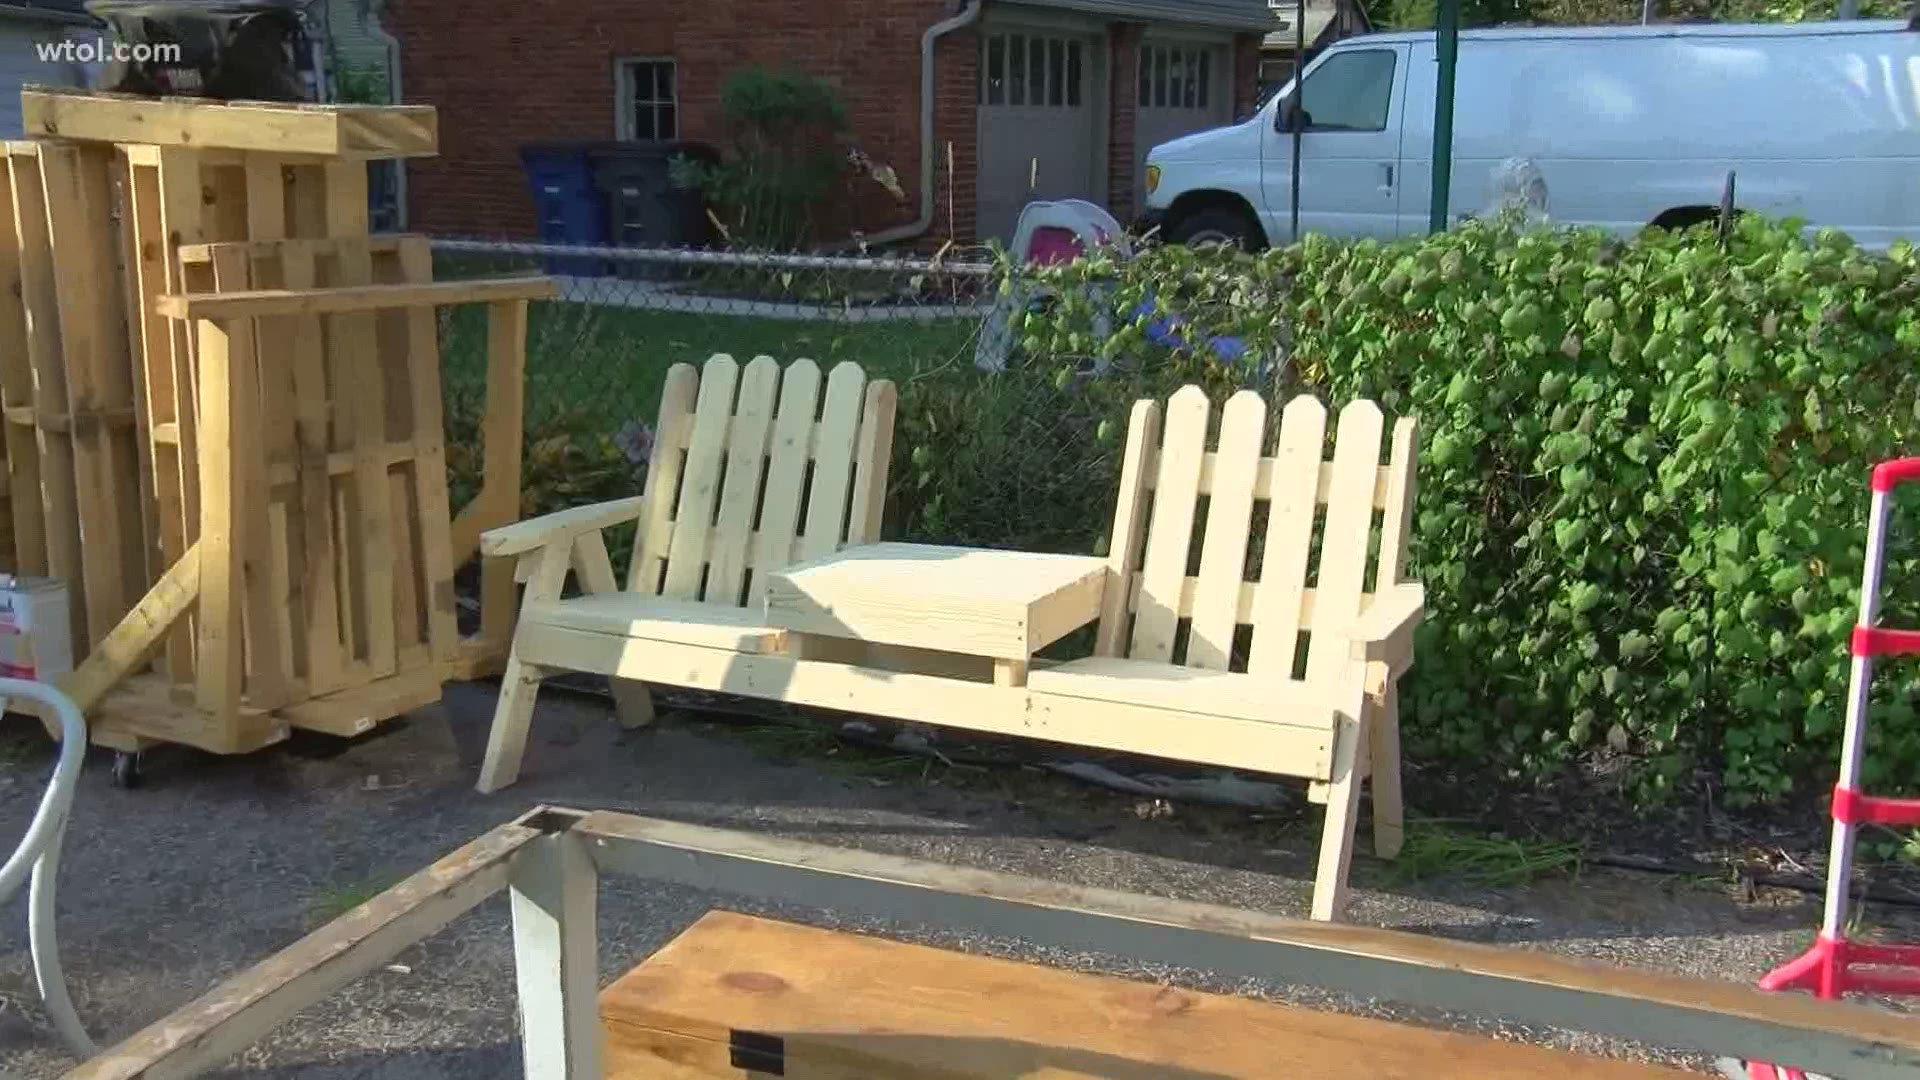 A local woodworker is making benches in memory of the three-year old Noble, who was found dead in a pool near his apartment after a nearly week-long search.